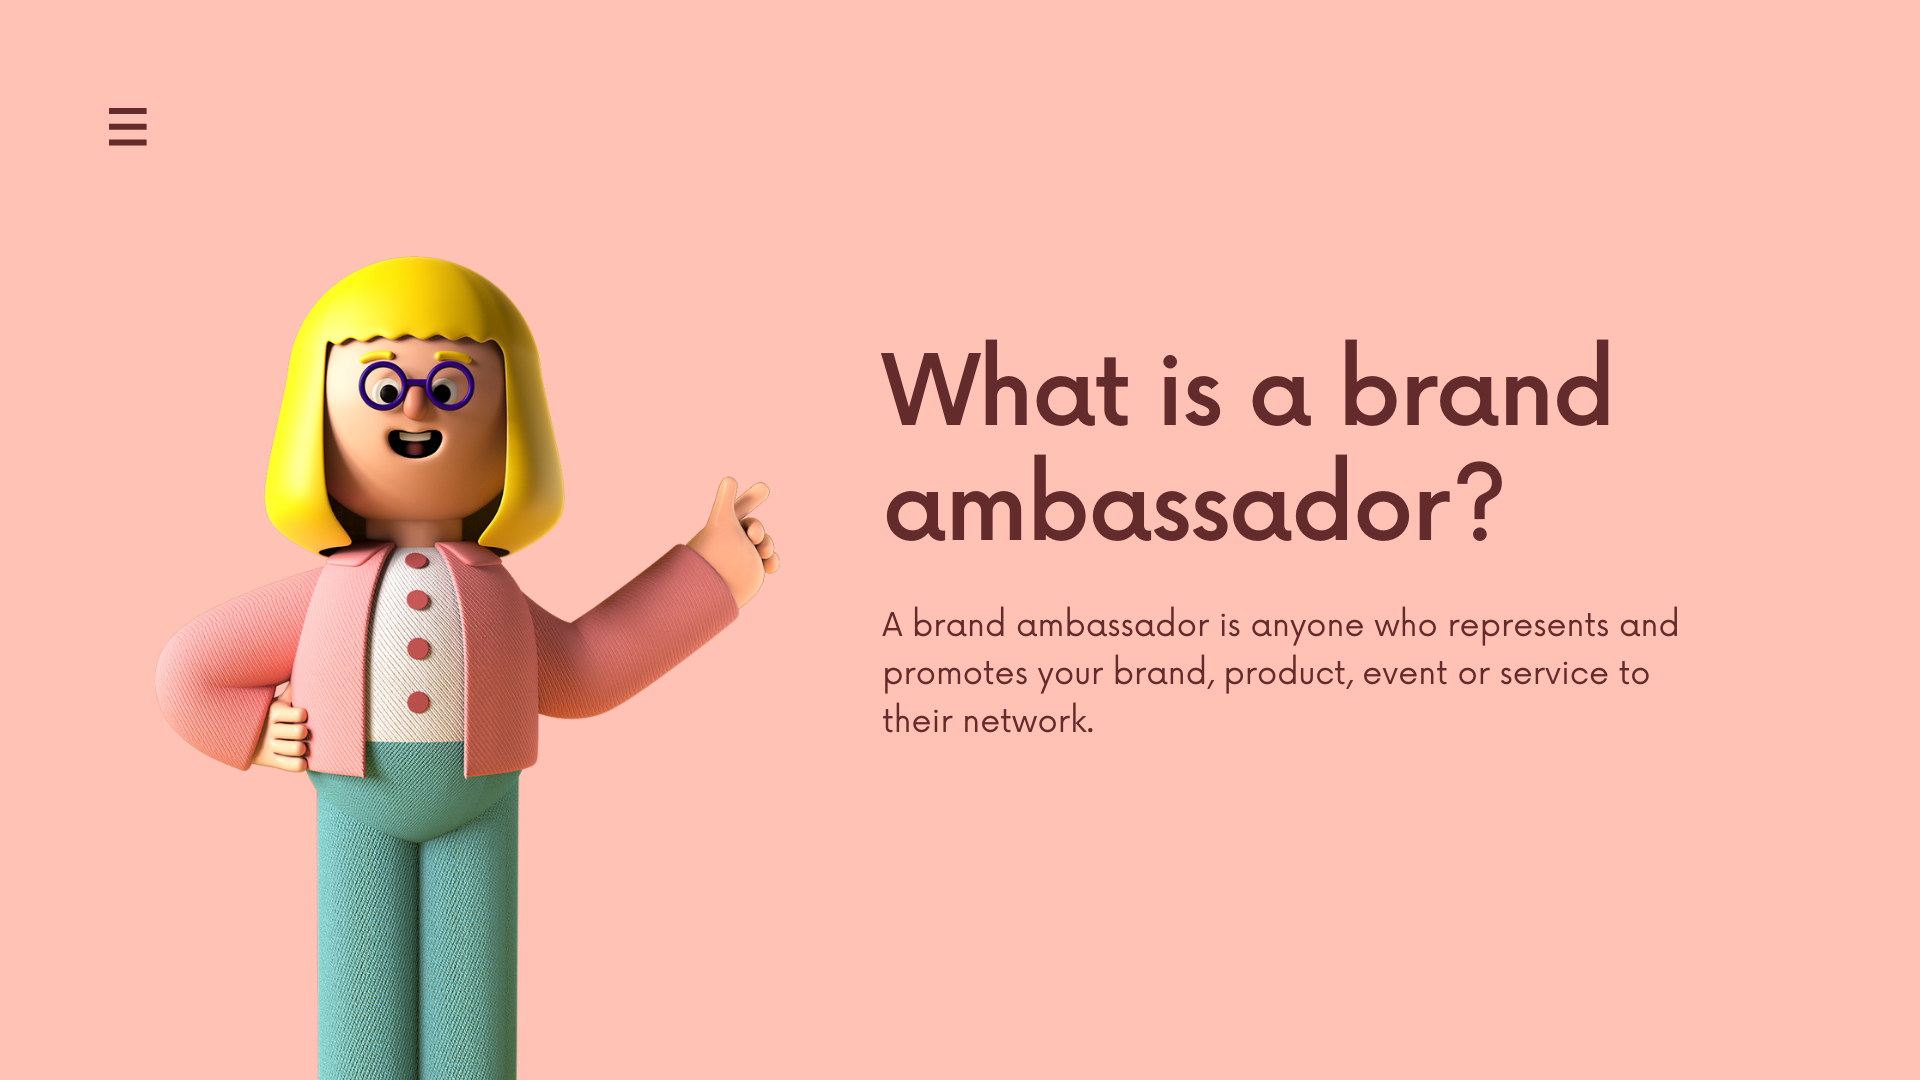 What is a brand ambassador